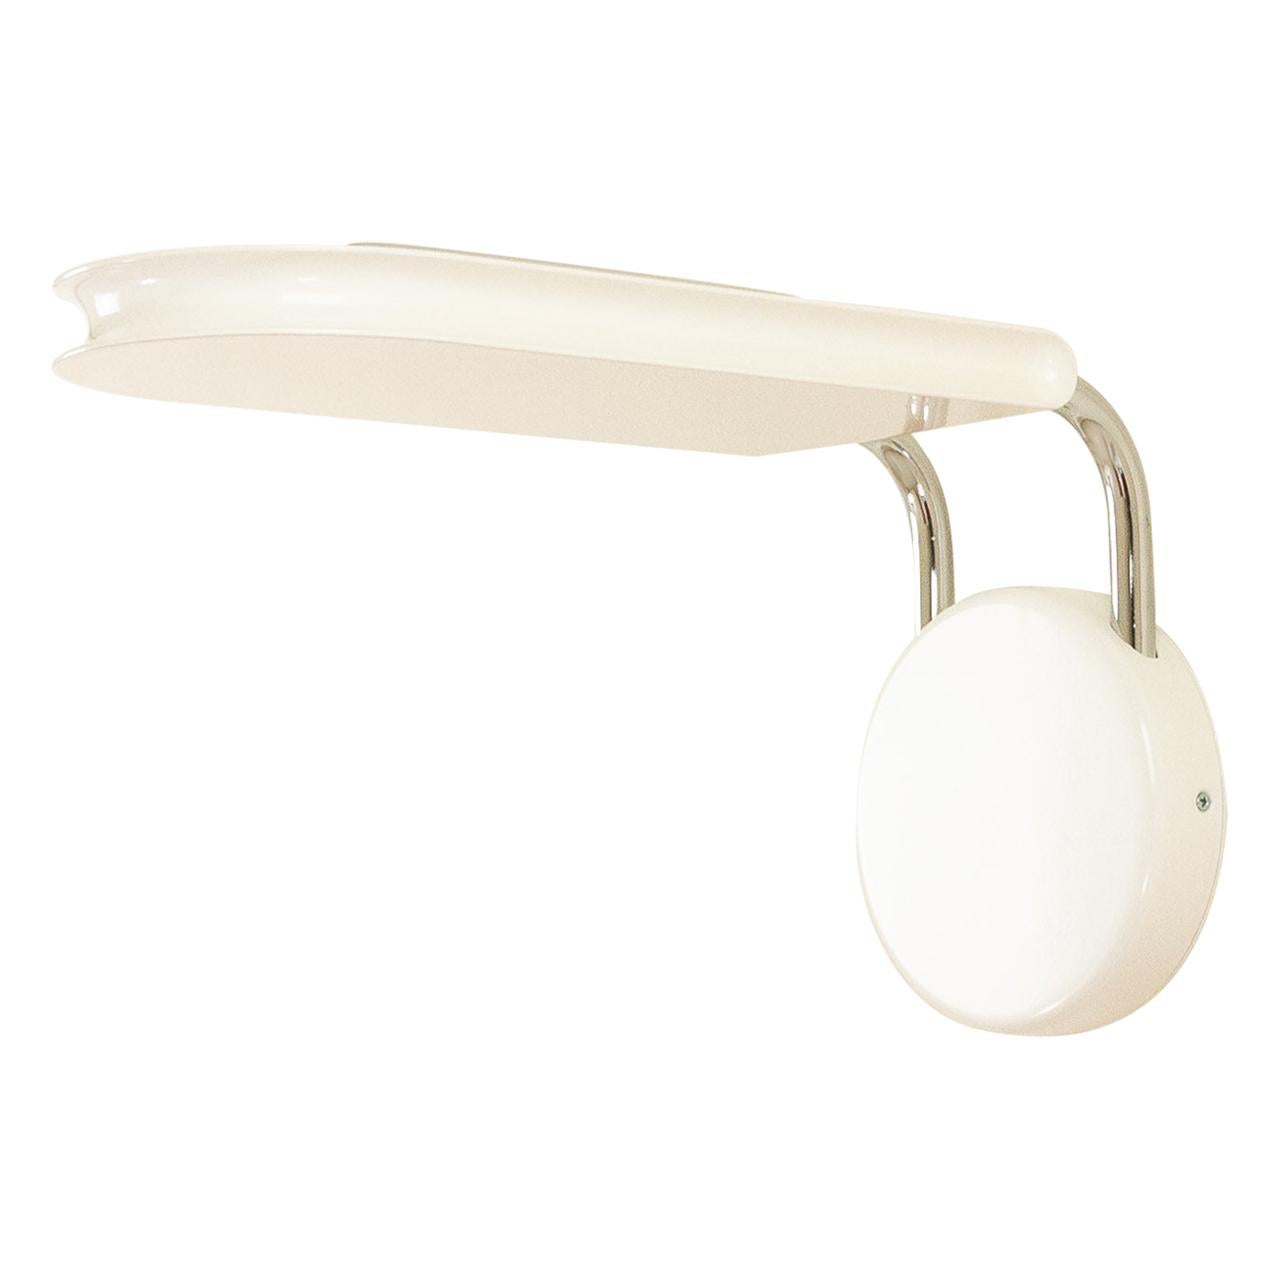 Gesto Wall Lamp by Bruno Gecchelin for Skipper, 1975 For Sale